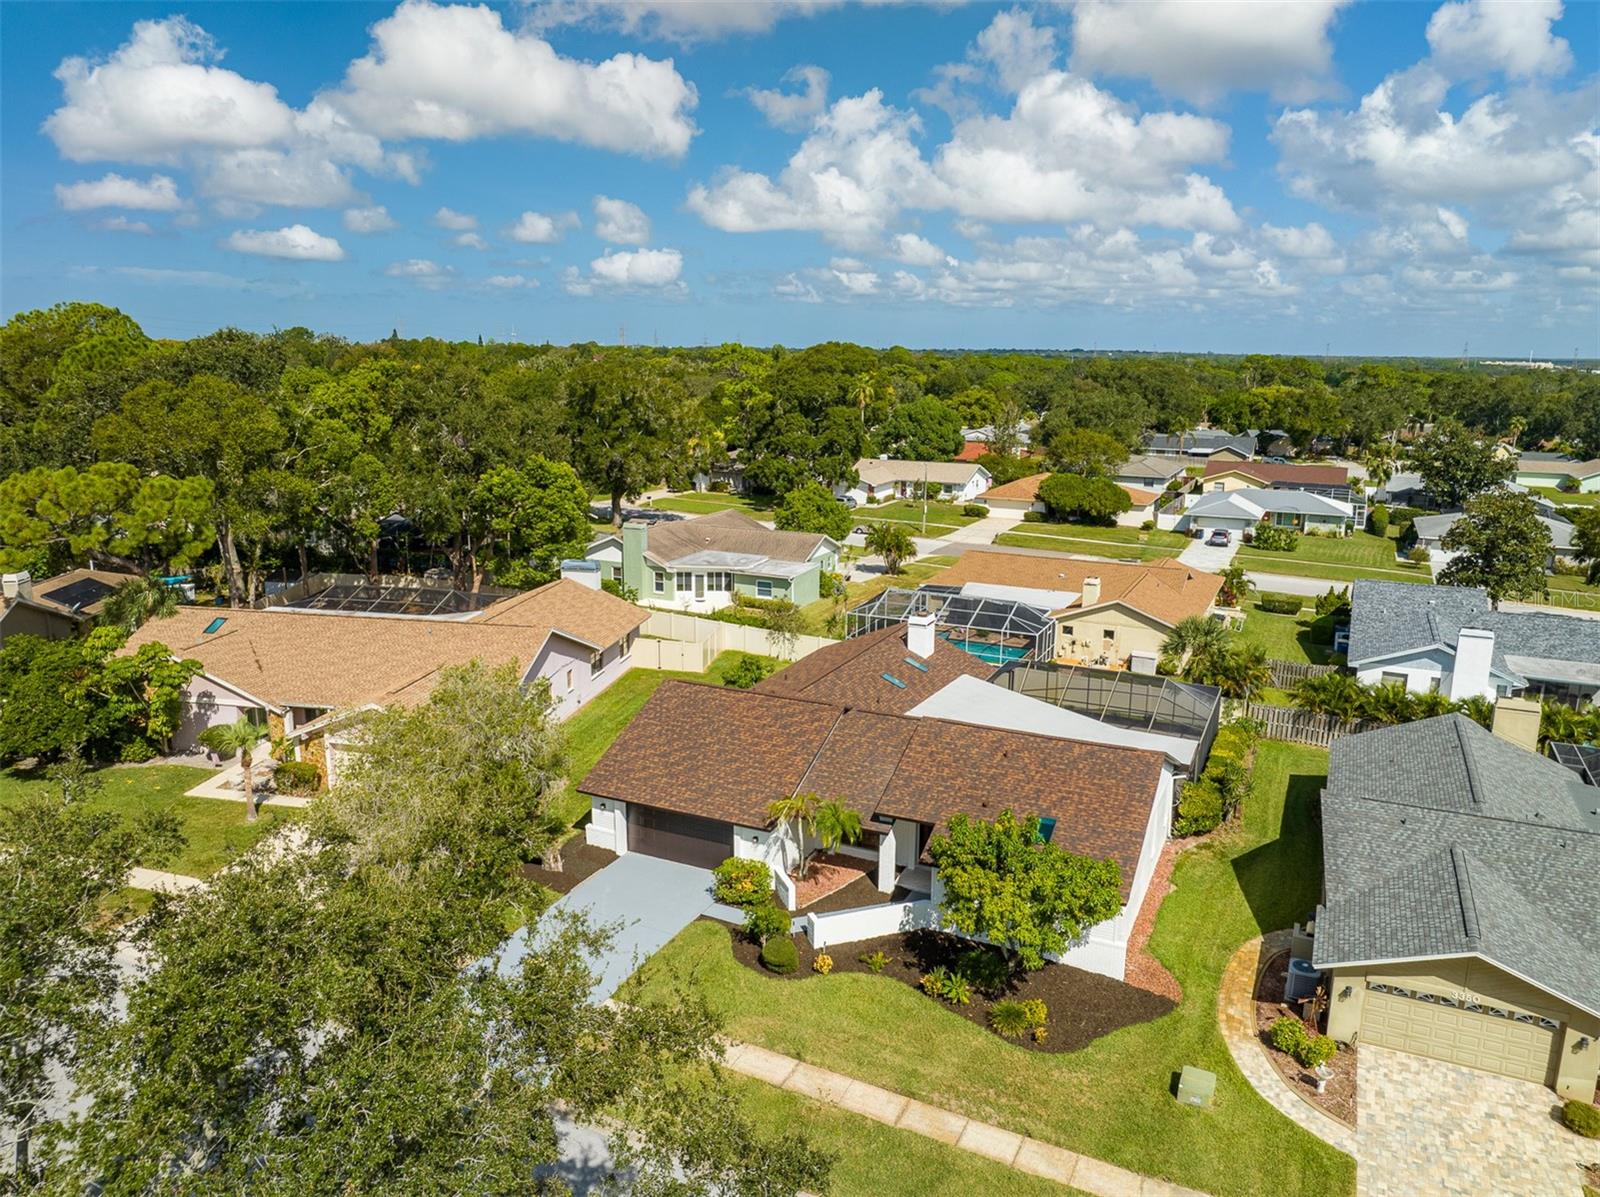 Enjoy the blue skies in the Countryside neighborhood of Clearwater Florida